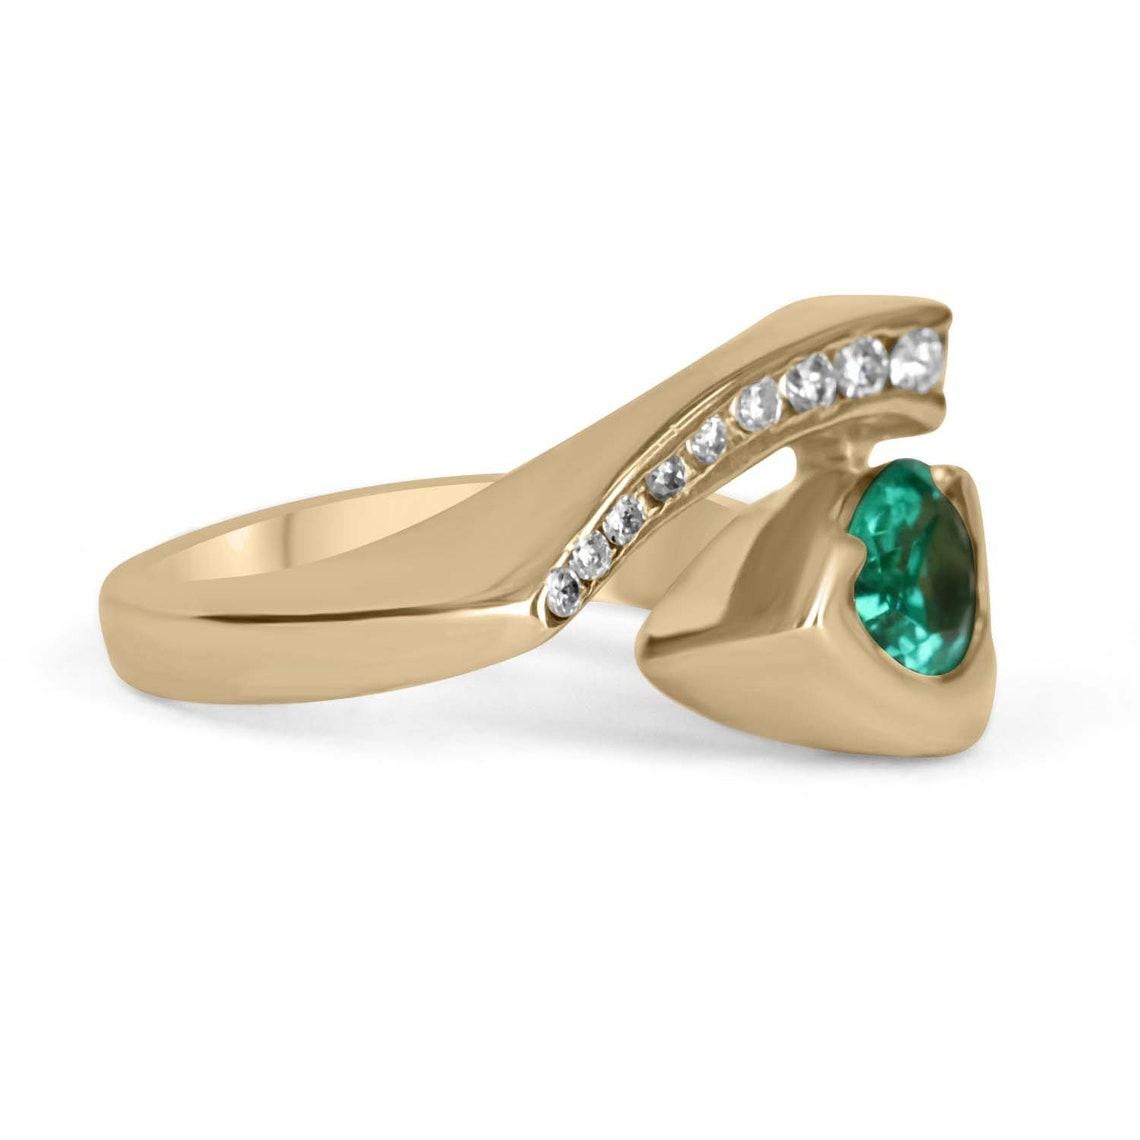 This is a stunning 14K yellow gold, Zambian emerald and diamond statement ring or right-hand ring. Absolutely stylish and sleek, ideal as a stand-alone piece or worn with other statement pieces. A teardrop-cut Colombian emerald is set in our